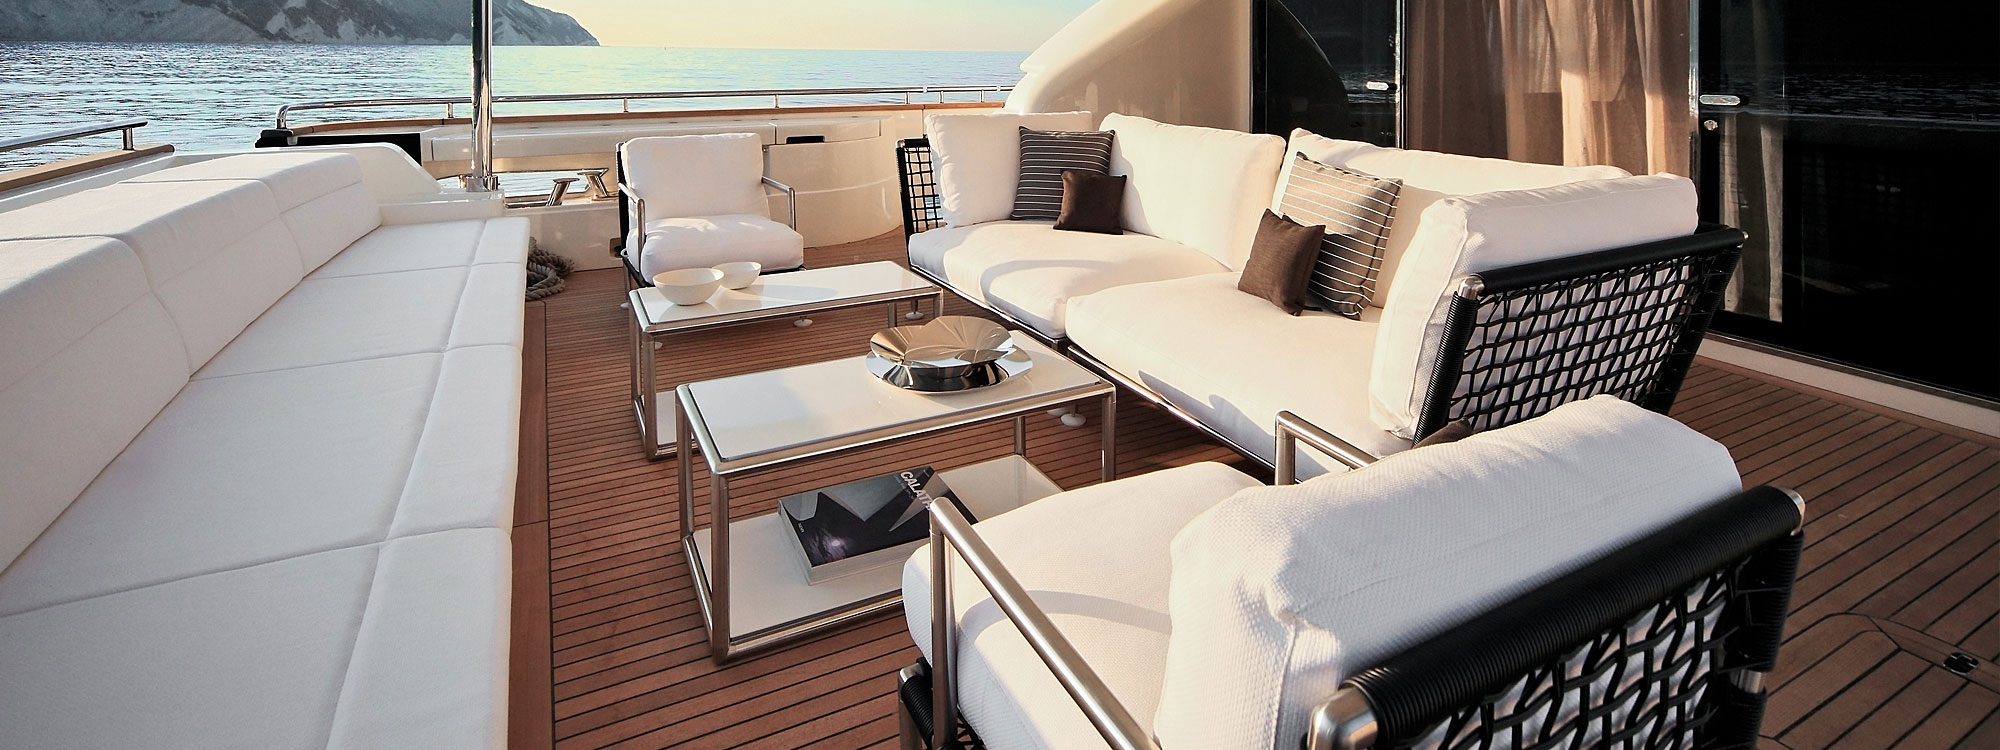 Image of Coro Nest garden sofa and lounge chairs with tubular stainless steel frames and black PVC cord arms and backs, shown on teak aft deck of superyacht